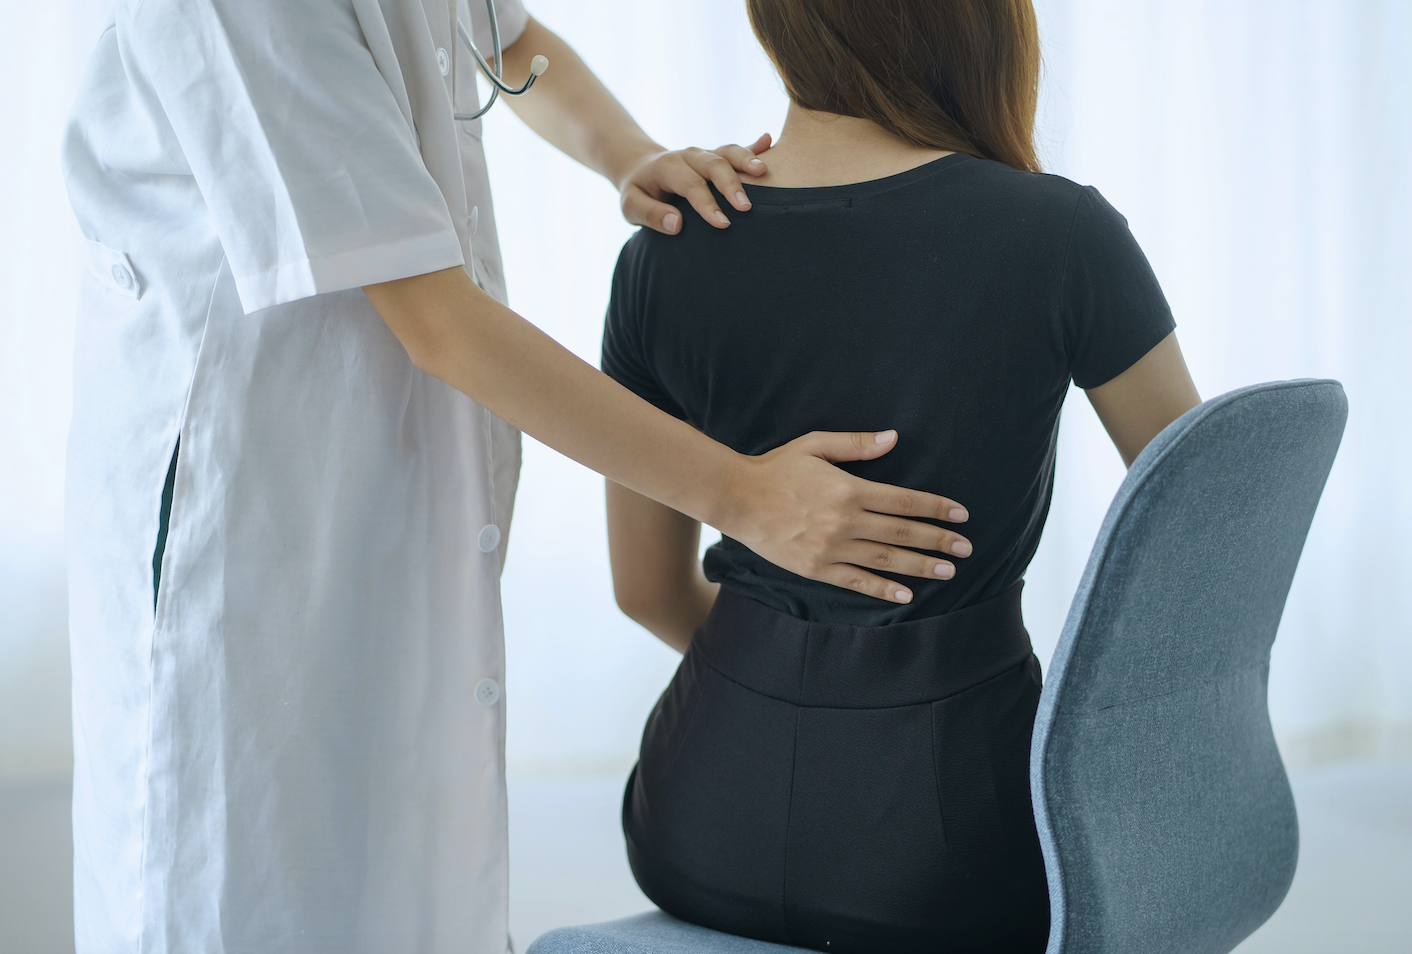 Women wearing a blue shirt sits with her back to the camera while a doctor examines her and places hand on her back.